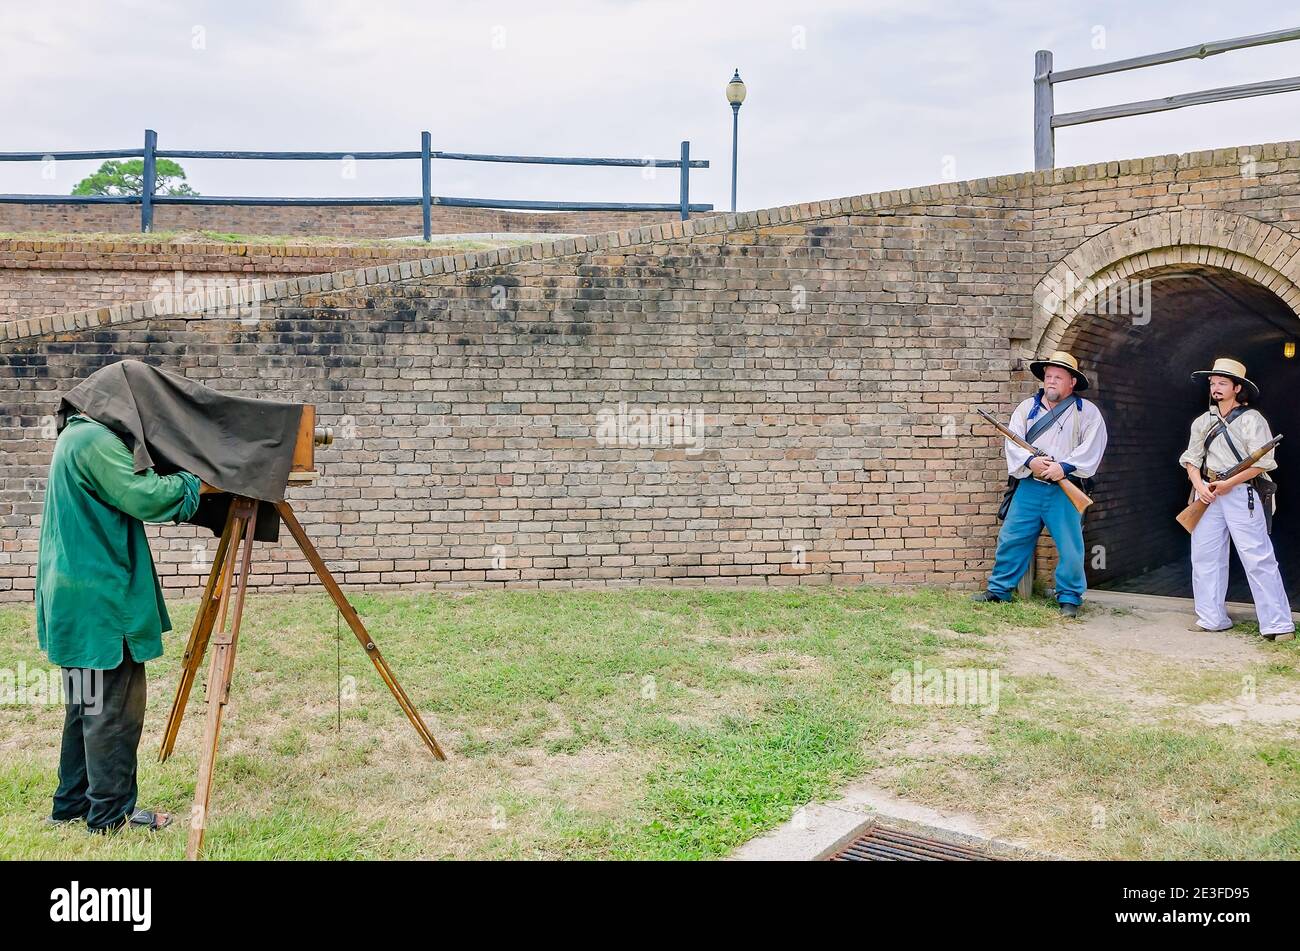 A photographer uses an antique view camera to photograph Civil War reenactors at Fort Gaines during a reenactment of the 150th Battle of Mobile Bay. Stock Photo